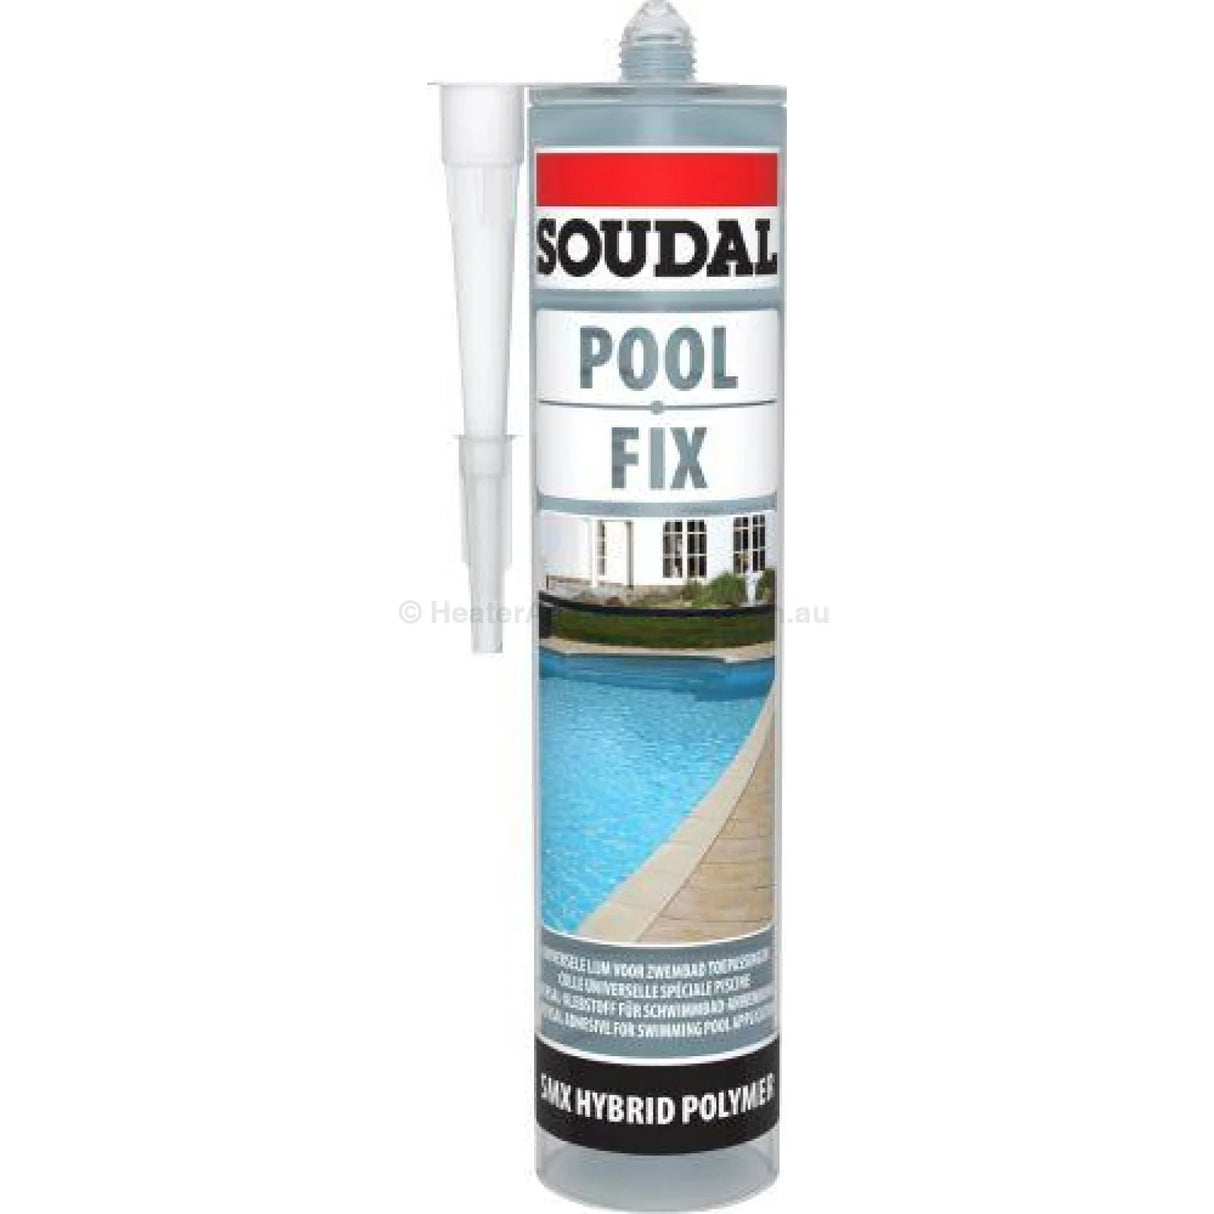 Soudal Pool Fix - Underwater Pool and Spa Sealant Glue - Heater and Spa Parts